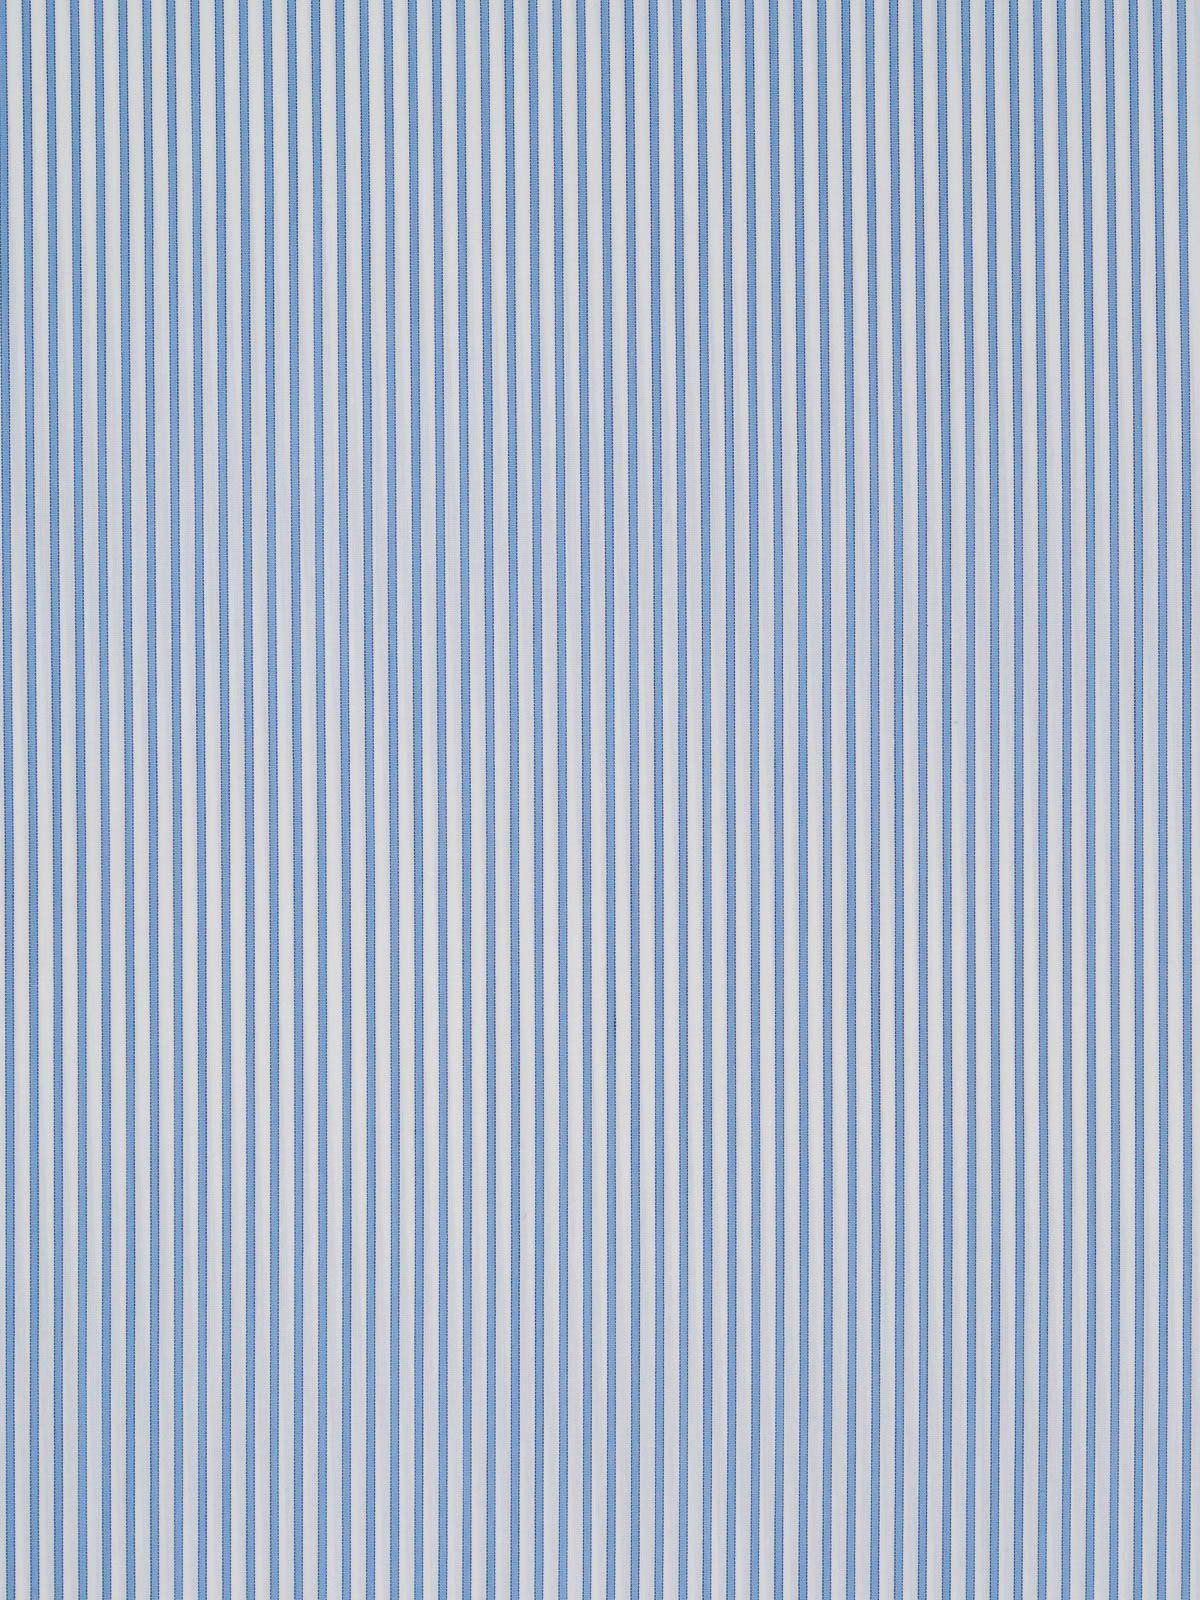 Blue and White Line Logo - 100% Cotton Twill Fabric